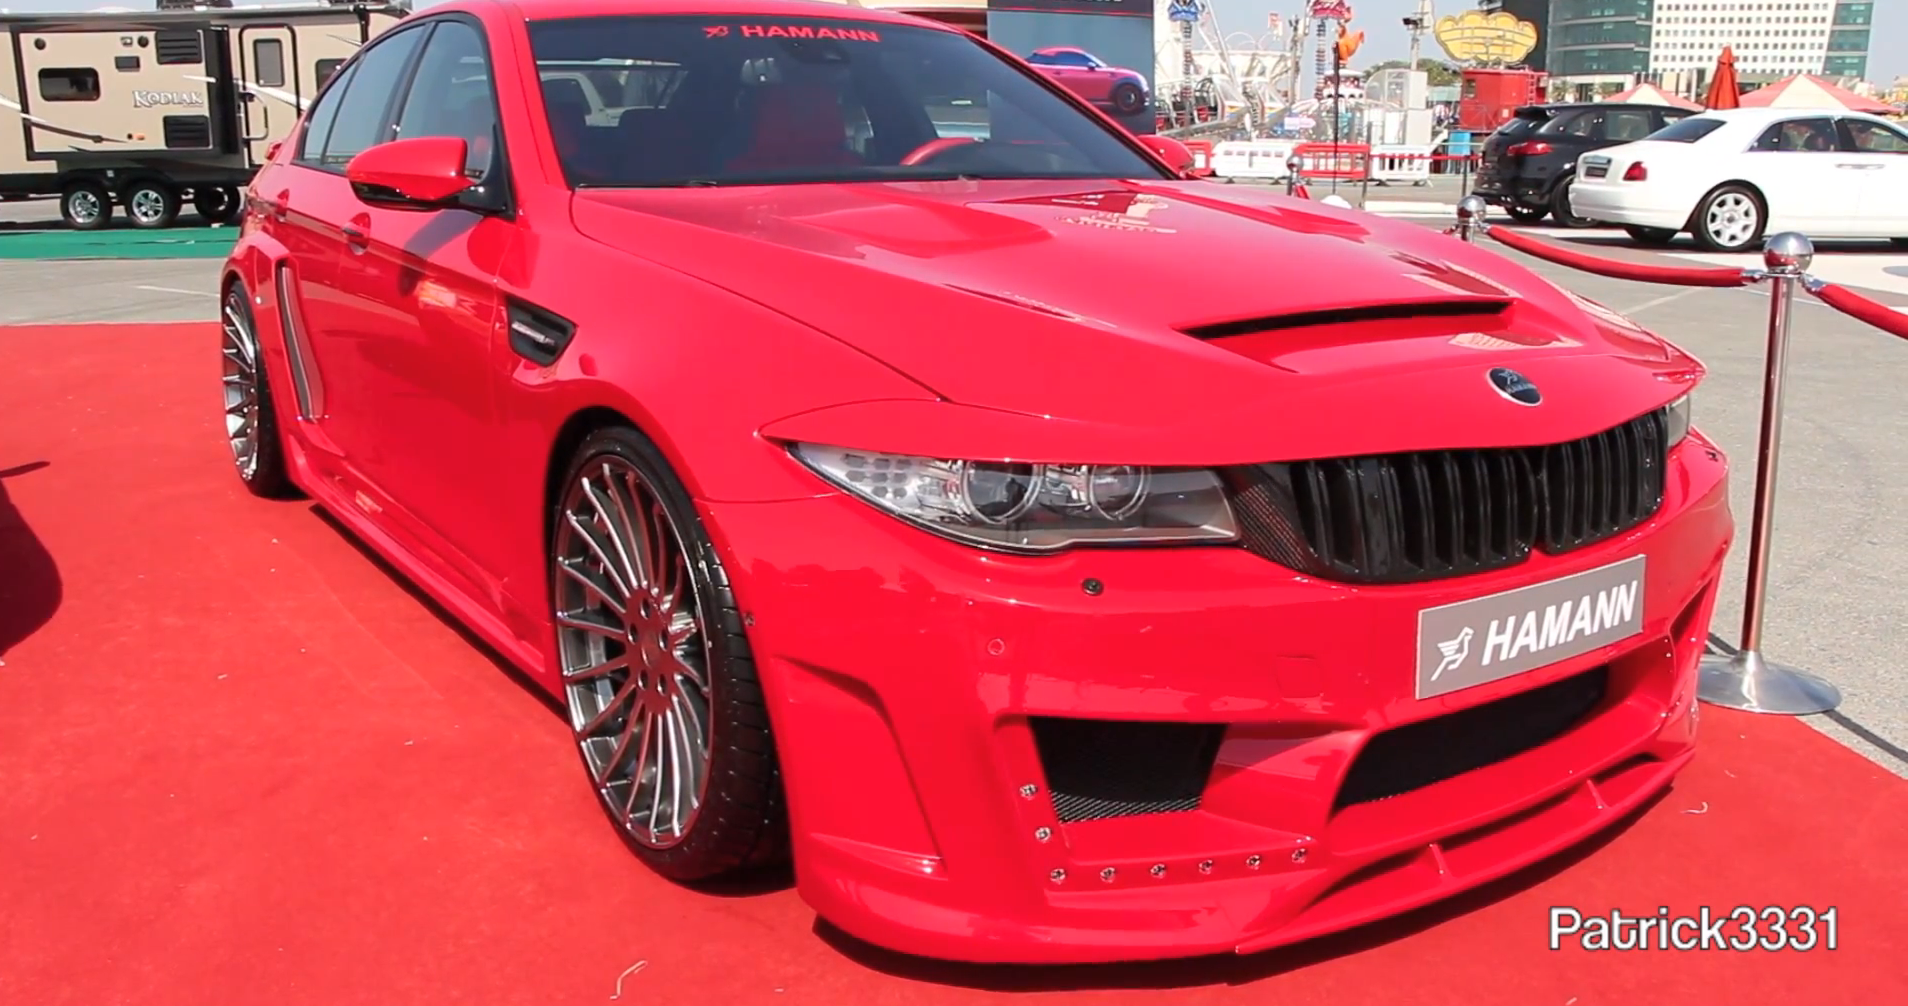 Hamann Mi5Sion Makes a First Appearance Outside of Geneva Show